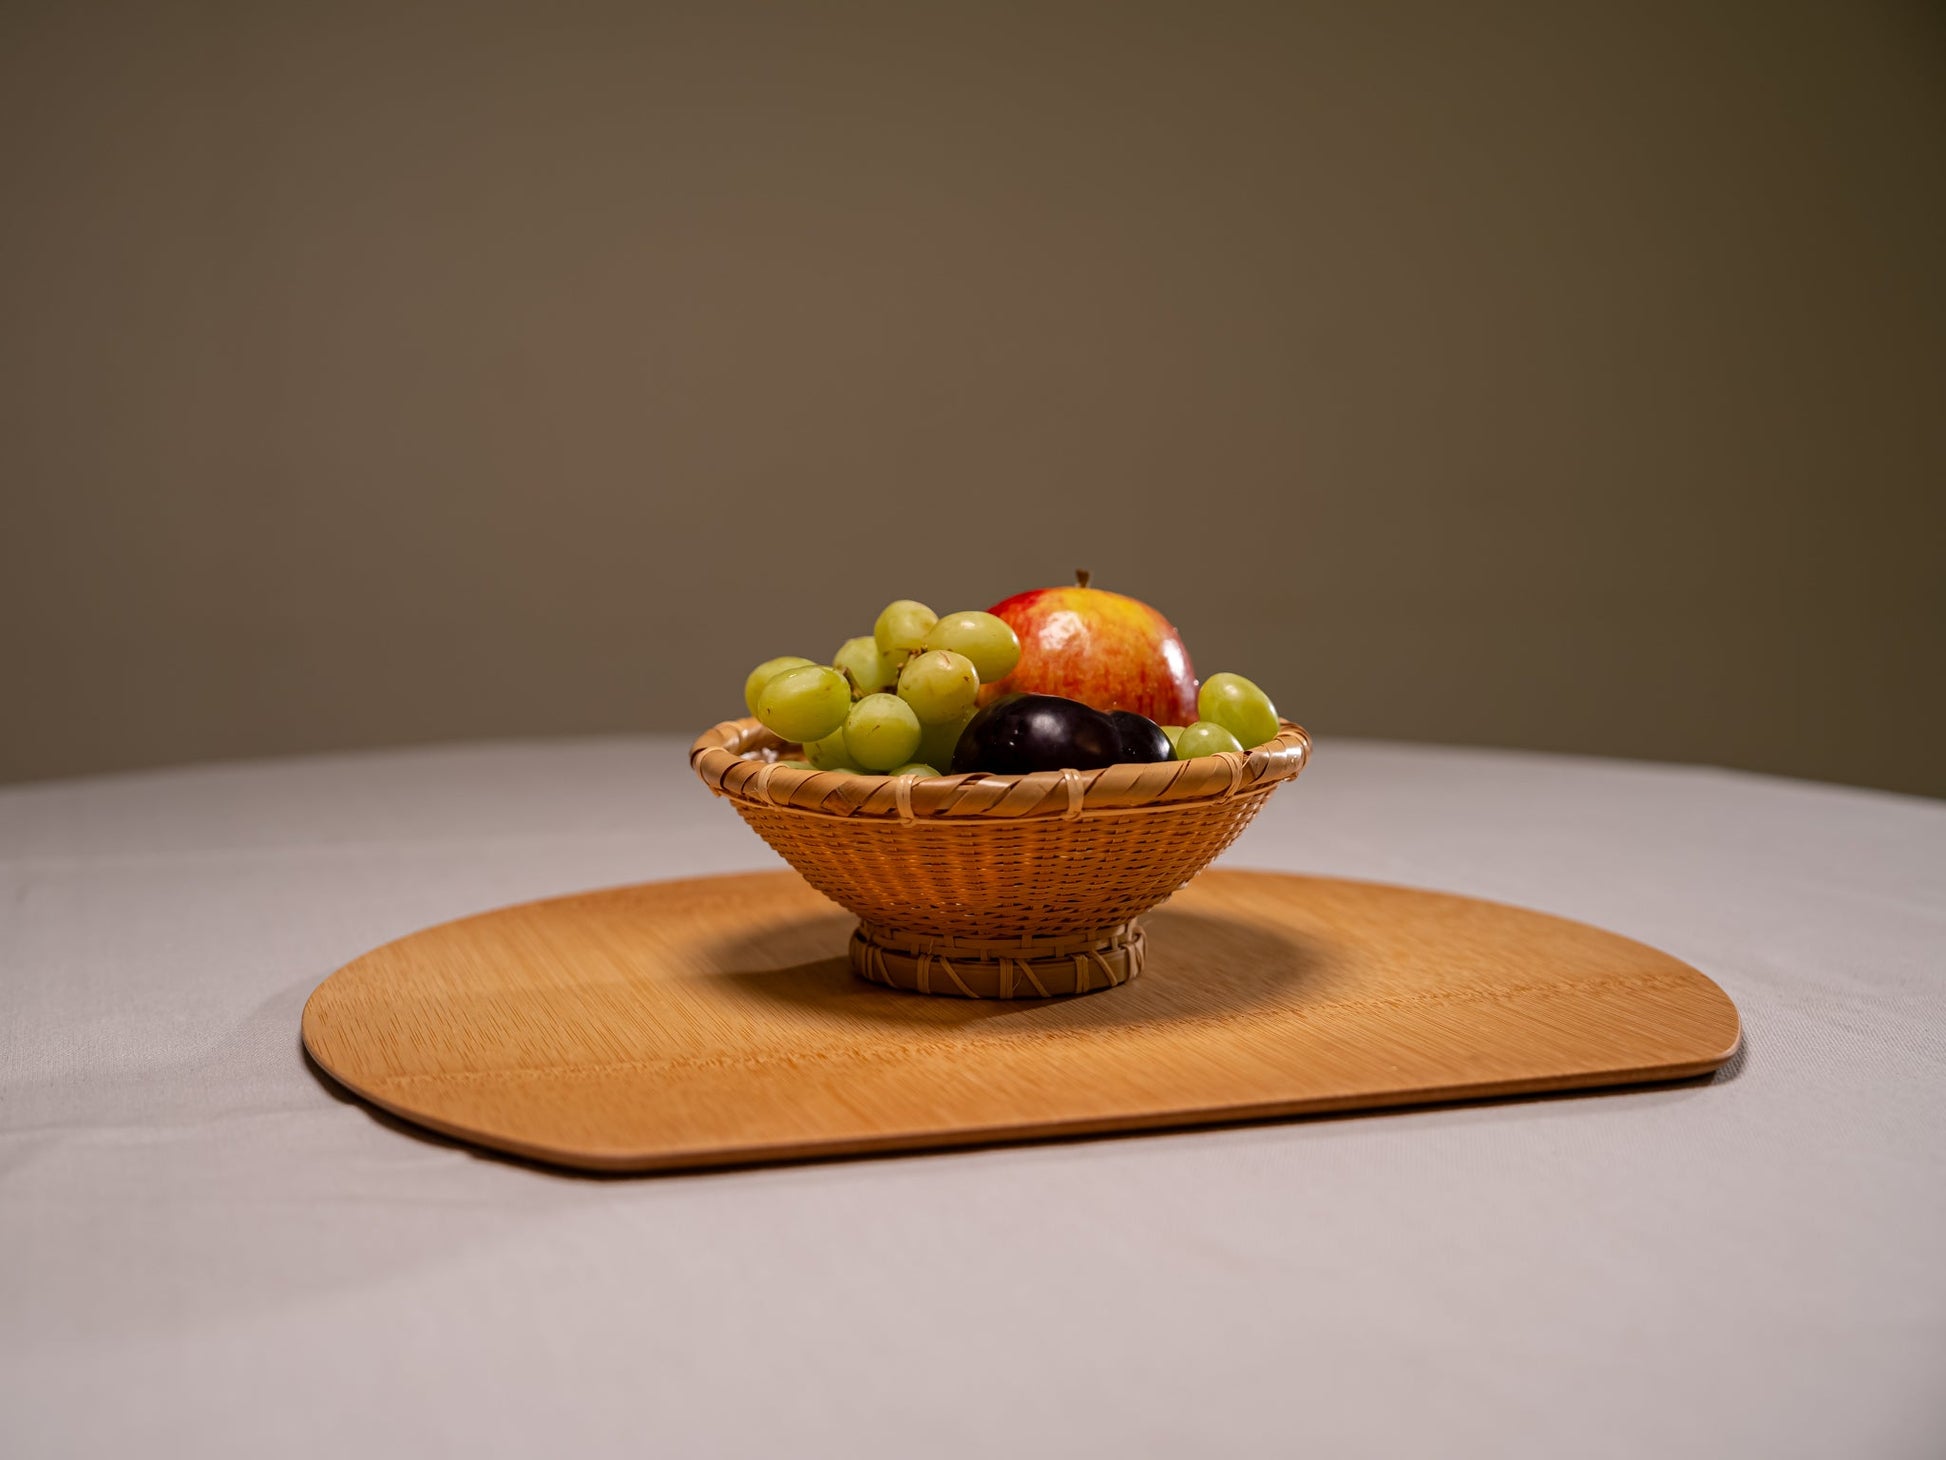 A Japanese bamboo half moon placemat with a bowl of fruit on top